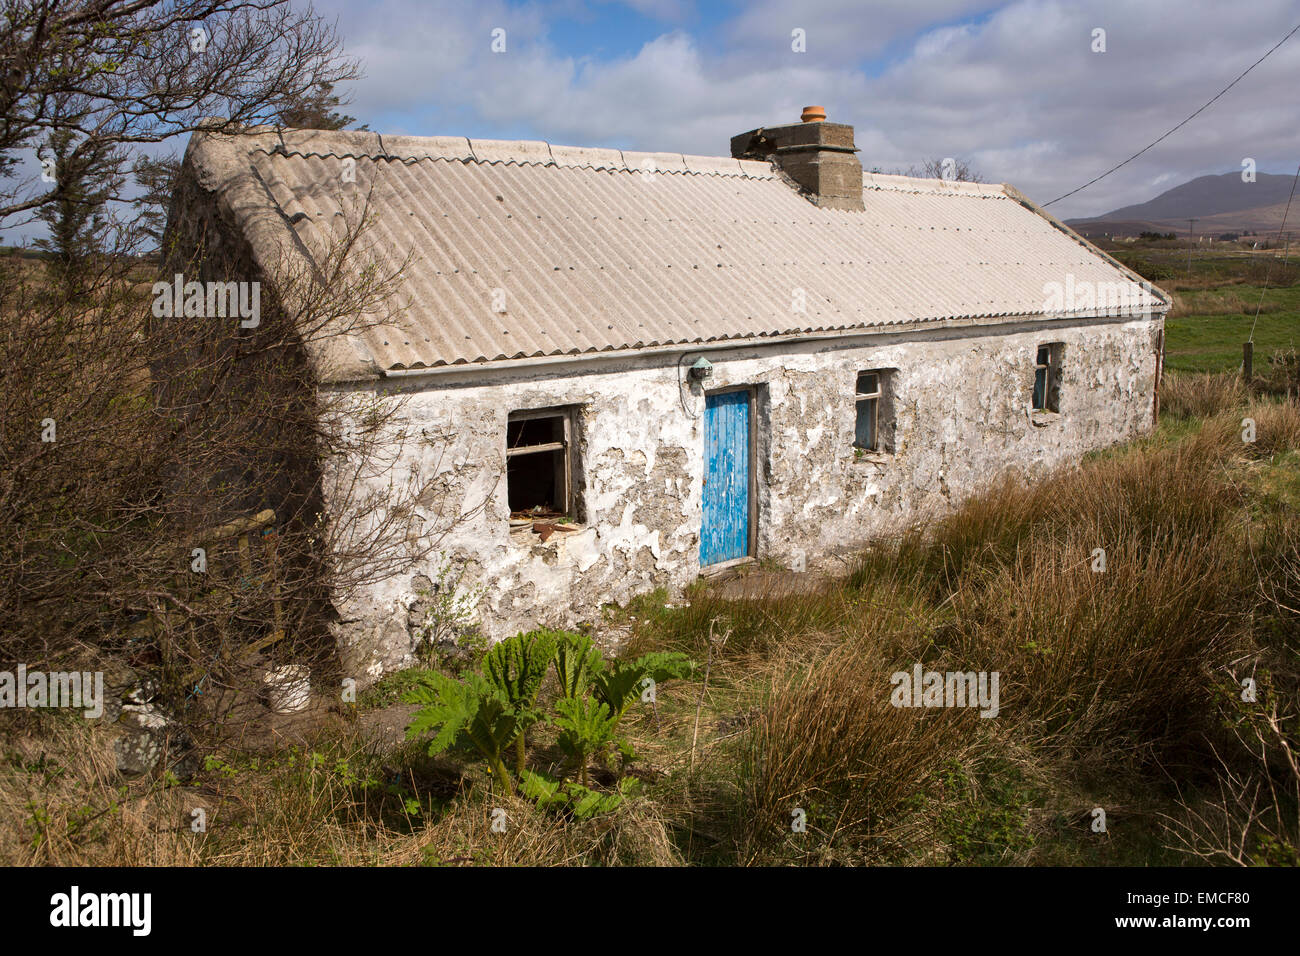 Ireland, Co Galway, Letterfrack, Connemara Loop, Lettermore, old cottage with new corugated roof Stock Photo